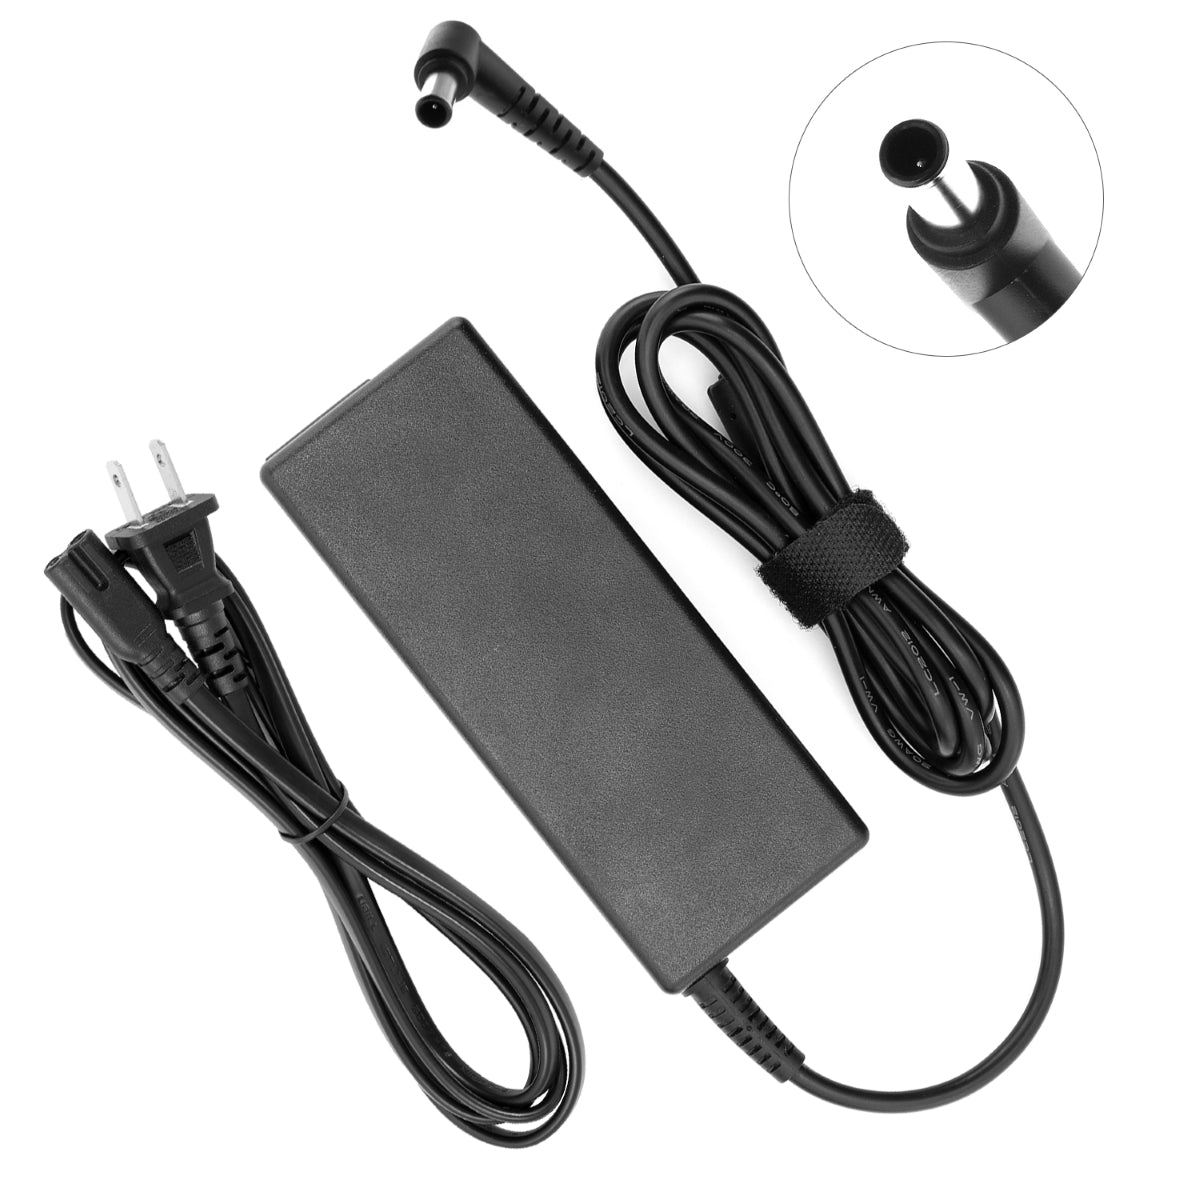 Power Adapter for Samsung LC27RG50FQNXZA Monitor TV